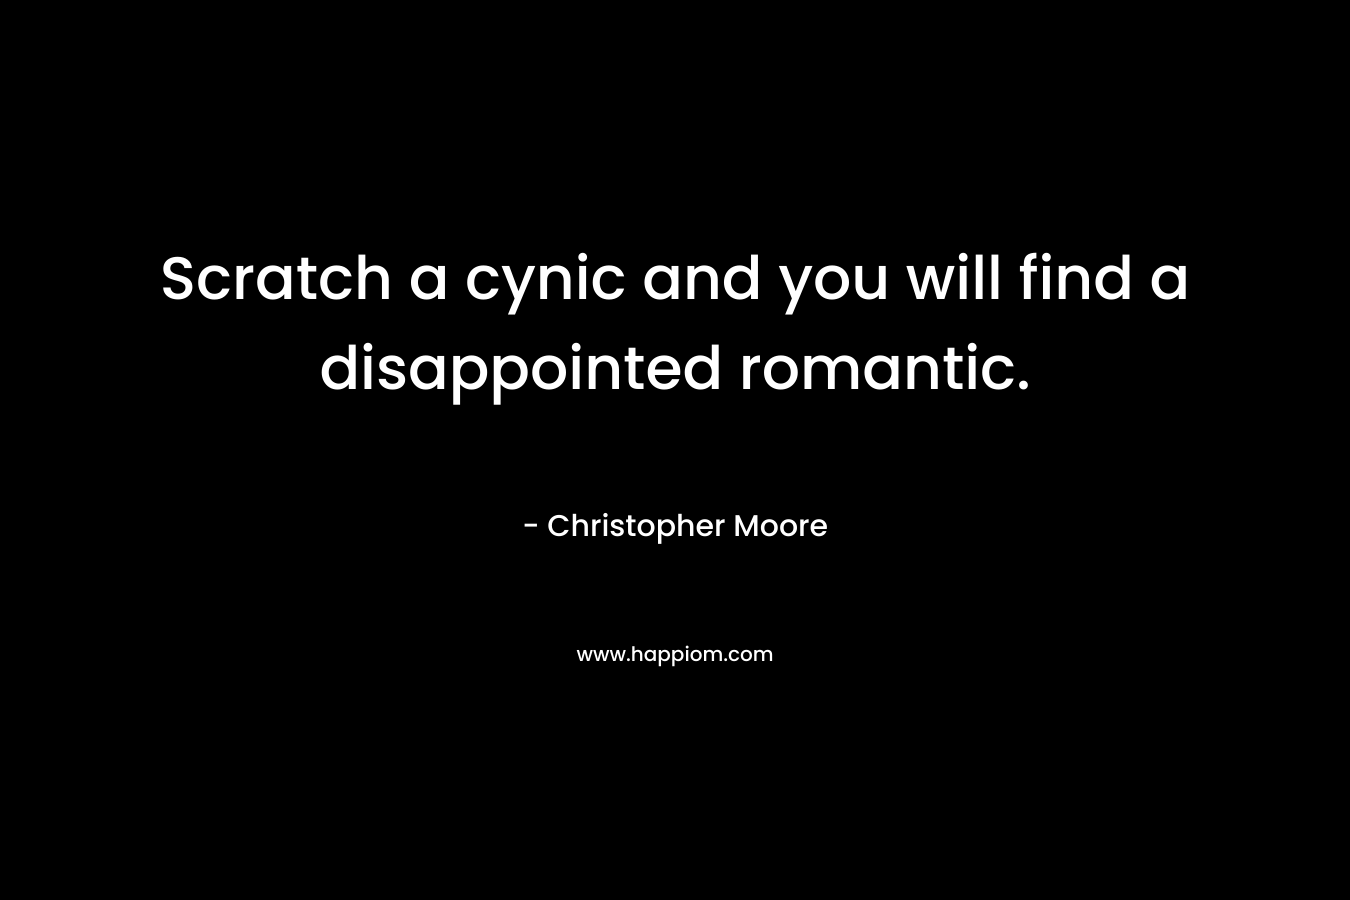 Scratch a cynic and you will find a disappointed romantic. – Christopher Moore